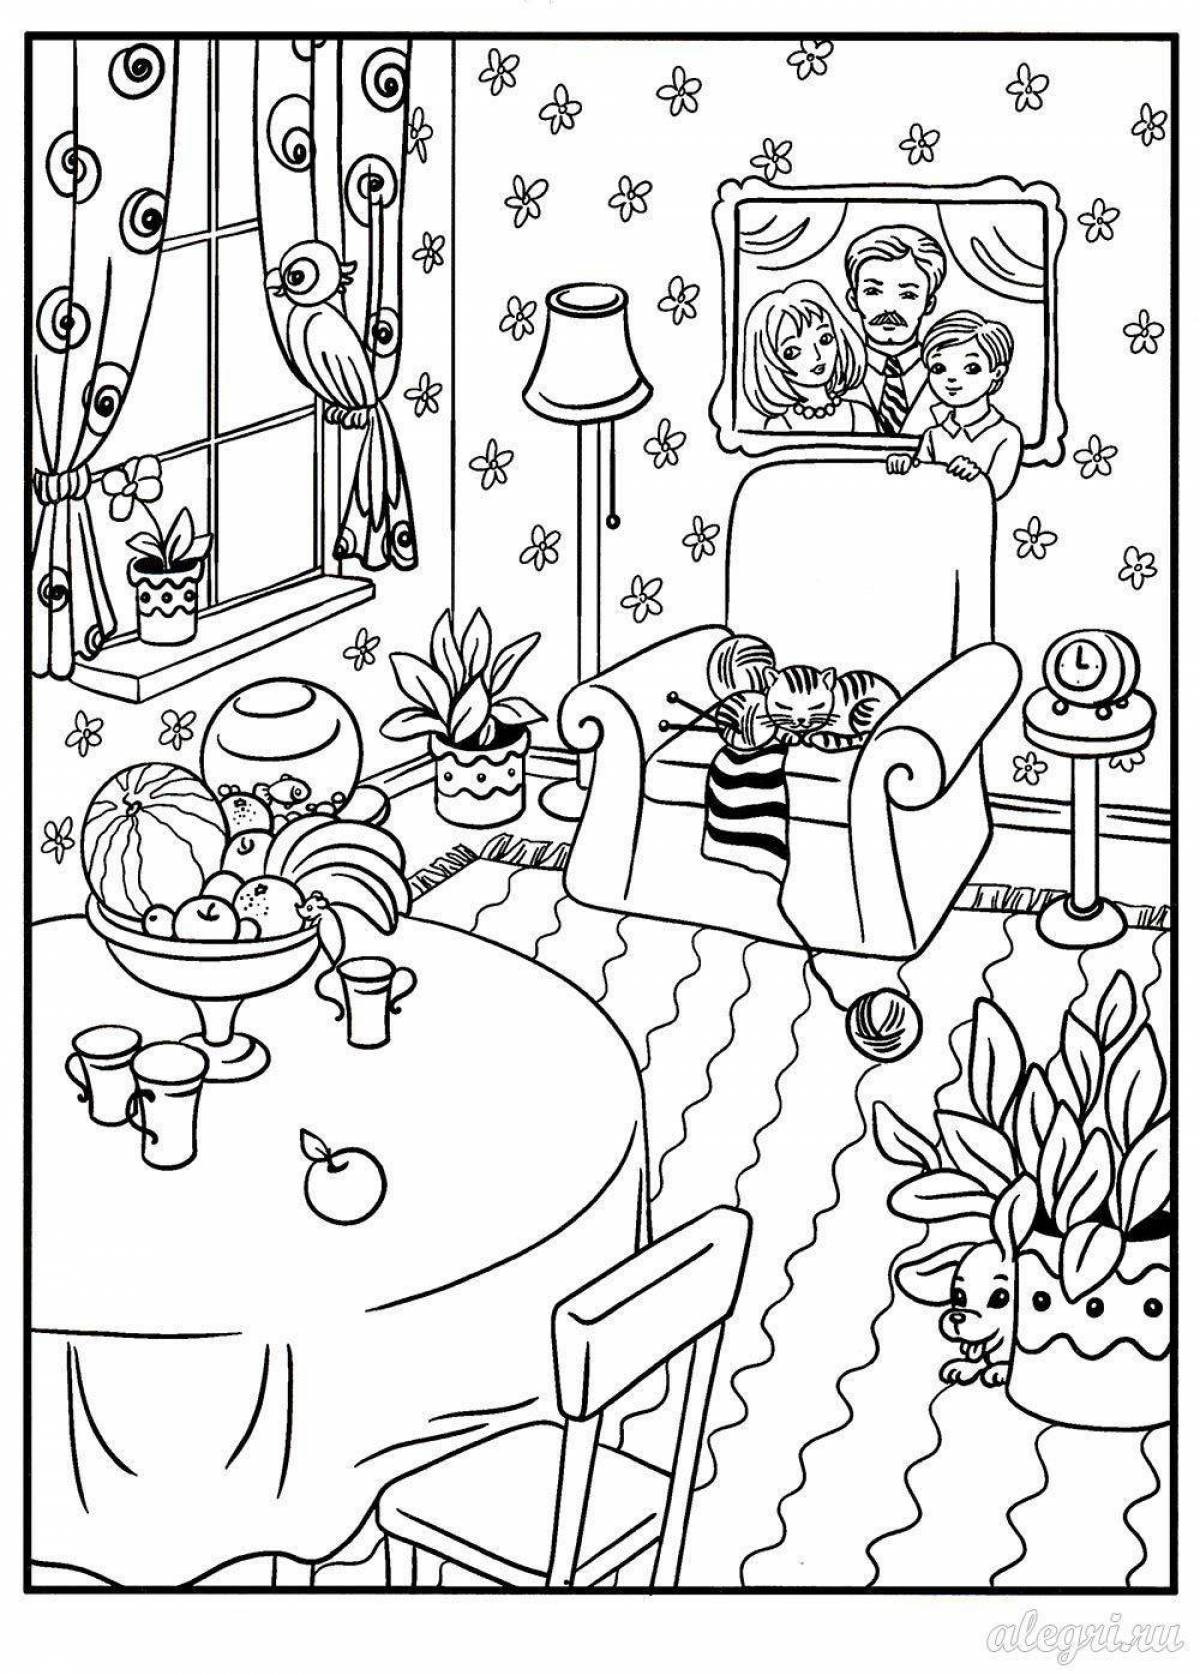 Bright coloring page where